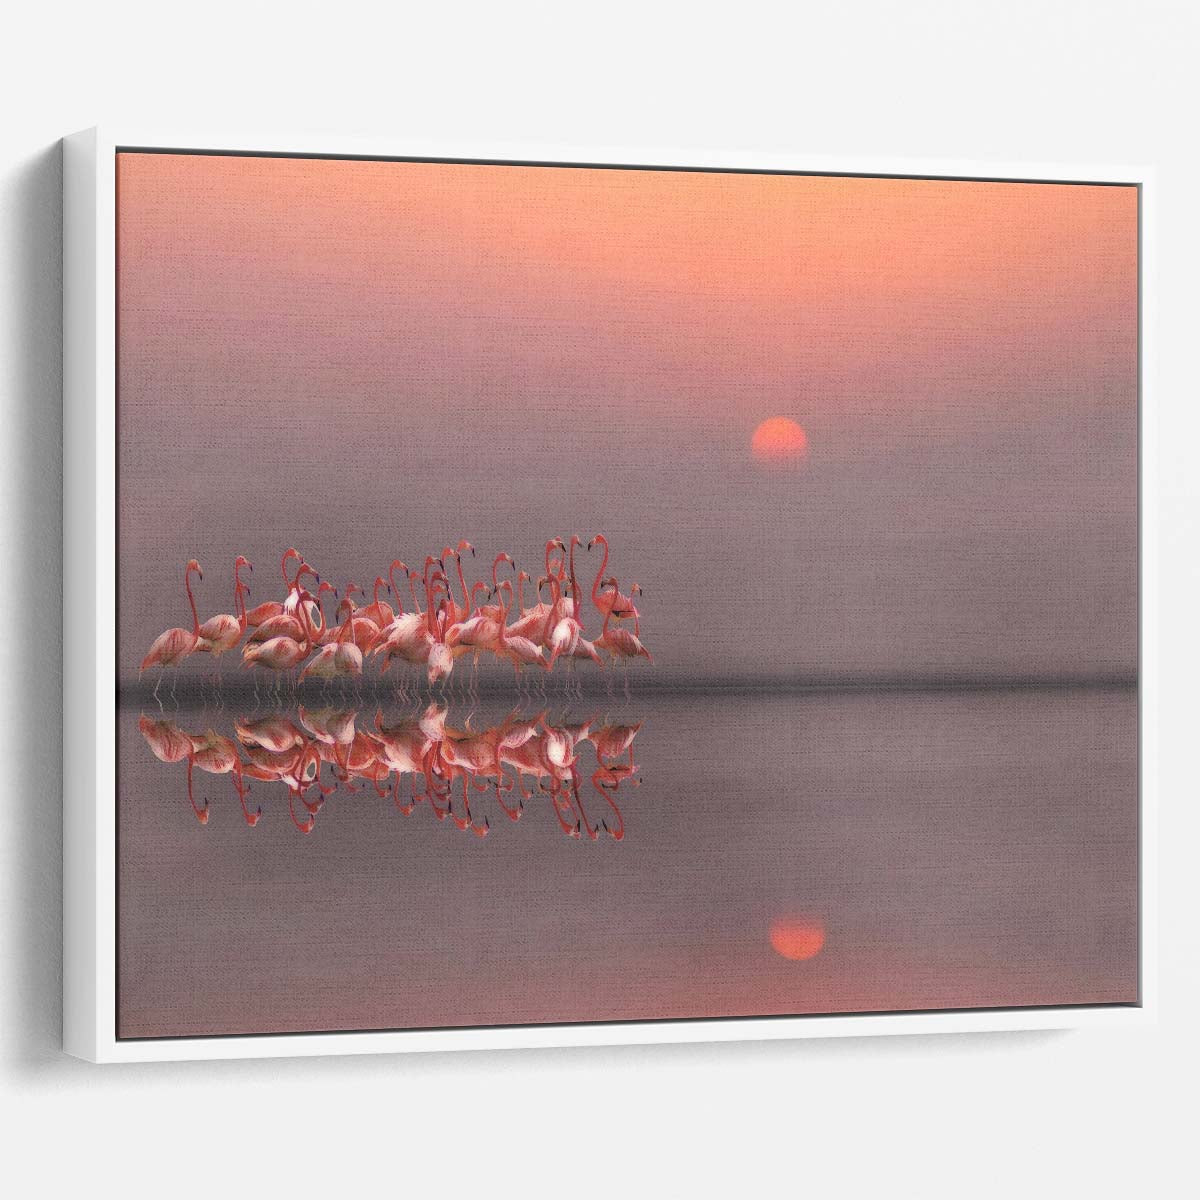 Sunset Flamingo Flock Reflection Wall Art by Anna Cseresnjes by Luxuriance Designs. Made in USA.